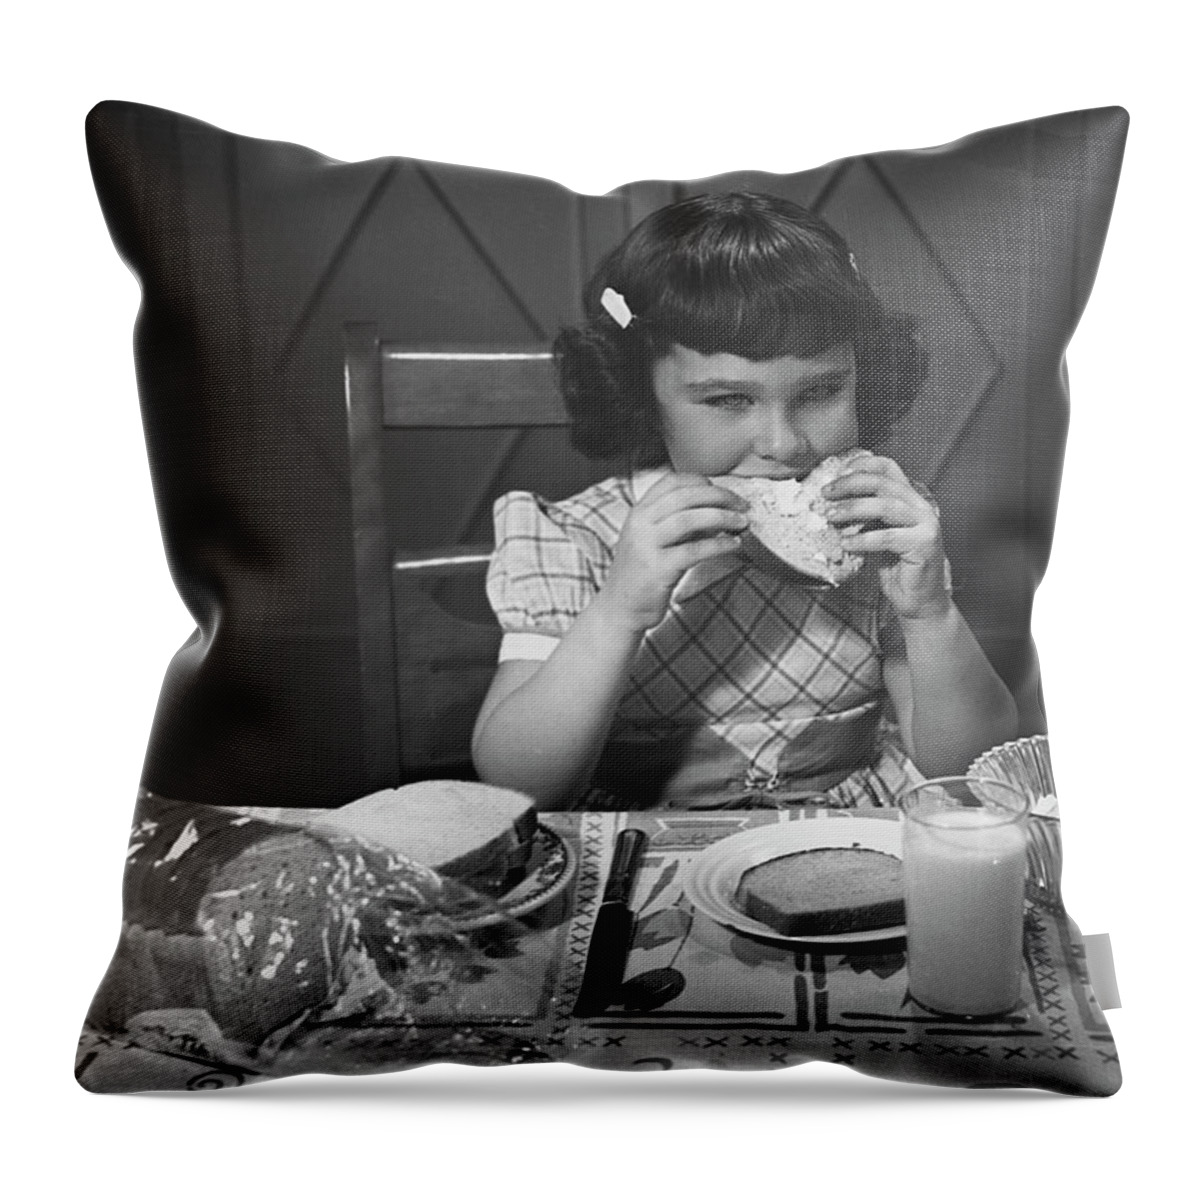 Milk Throw Pillow featuring the photograph Portrait Of Little Girl Eating Buttered by George Marks